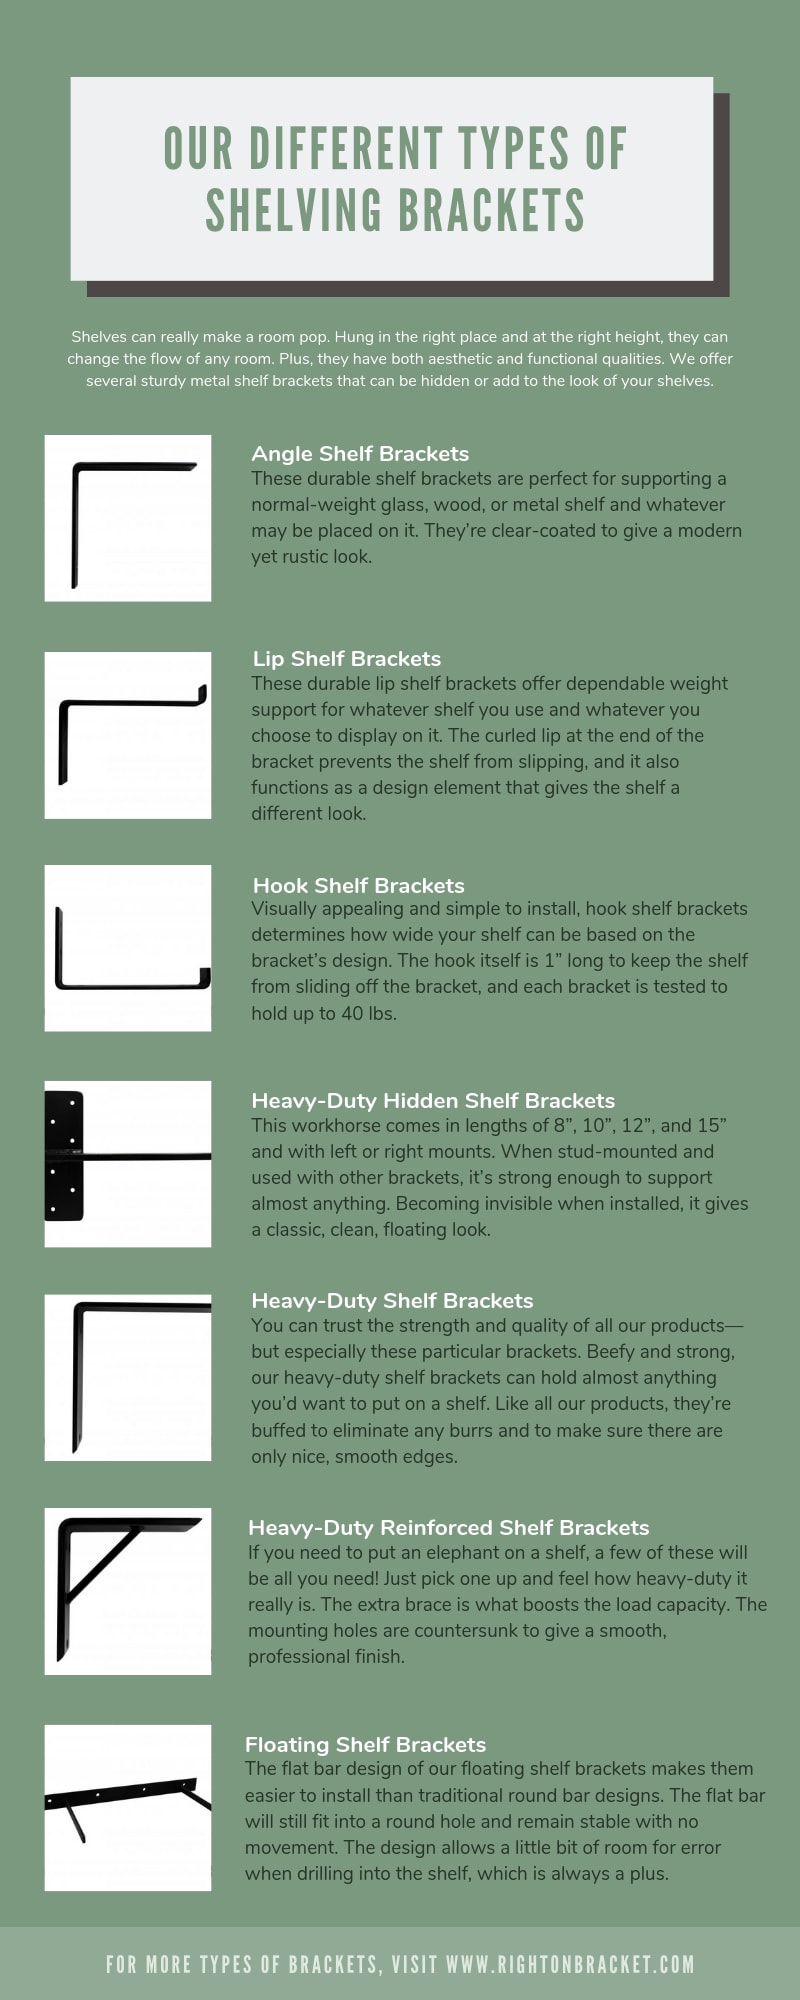 https://rightonbracket.com/wp-content/uploads/2020/05/Our-Different-Types-of-Wall-and-Countertop-Brackets-infographic_ez2loi.png